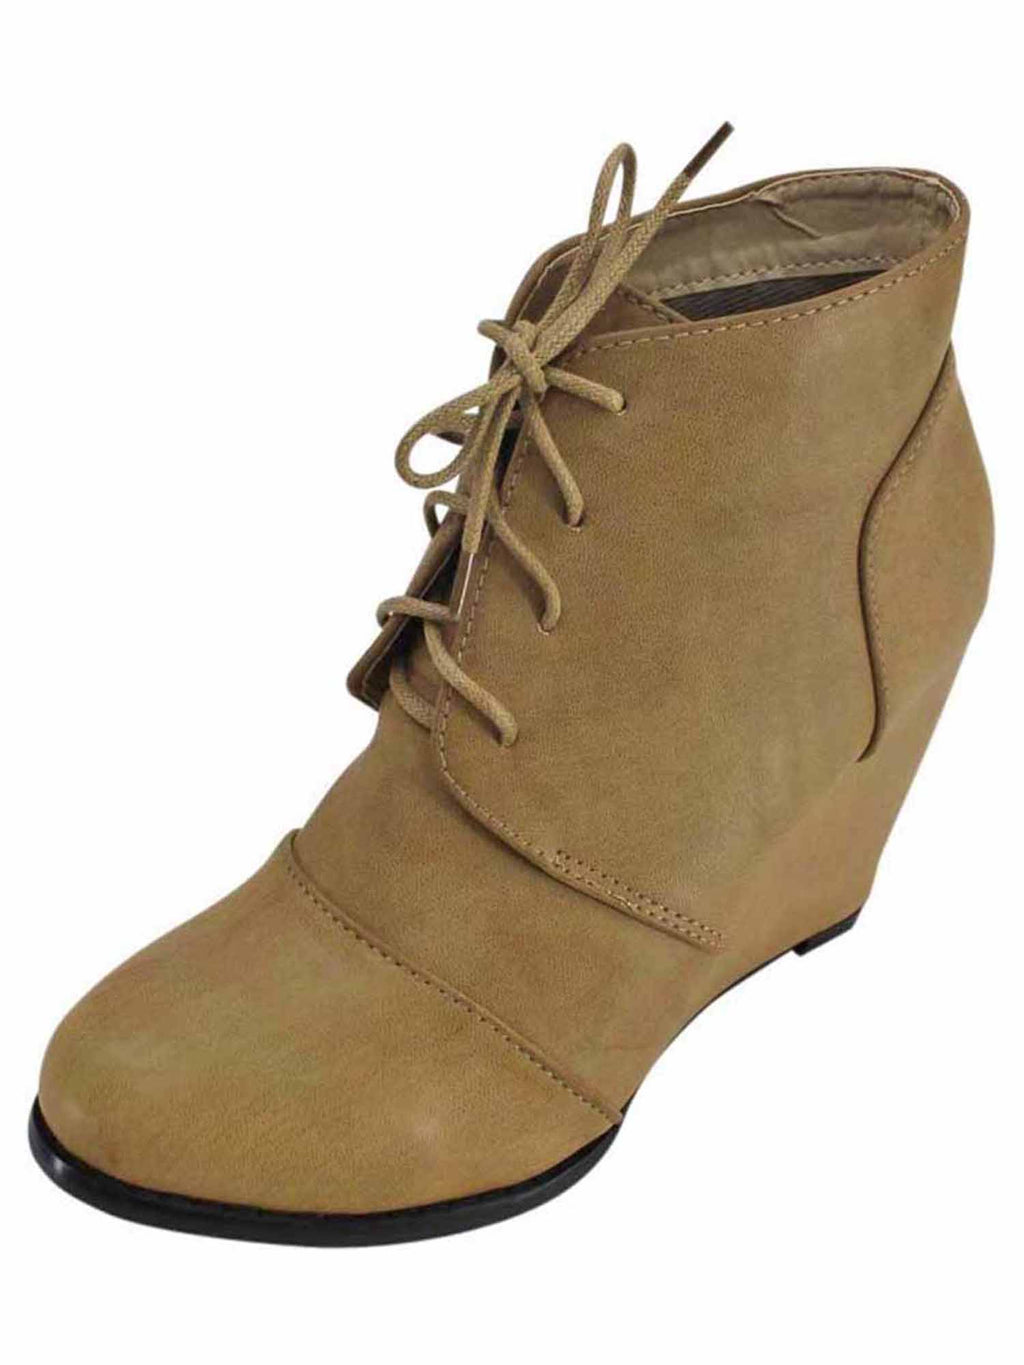 Lace-Up Wedge Heel Ankle Booties For Women